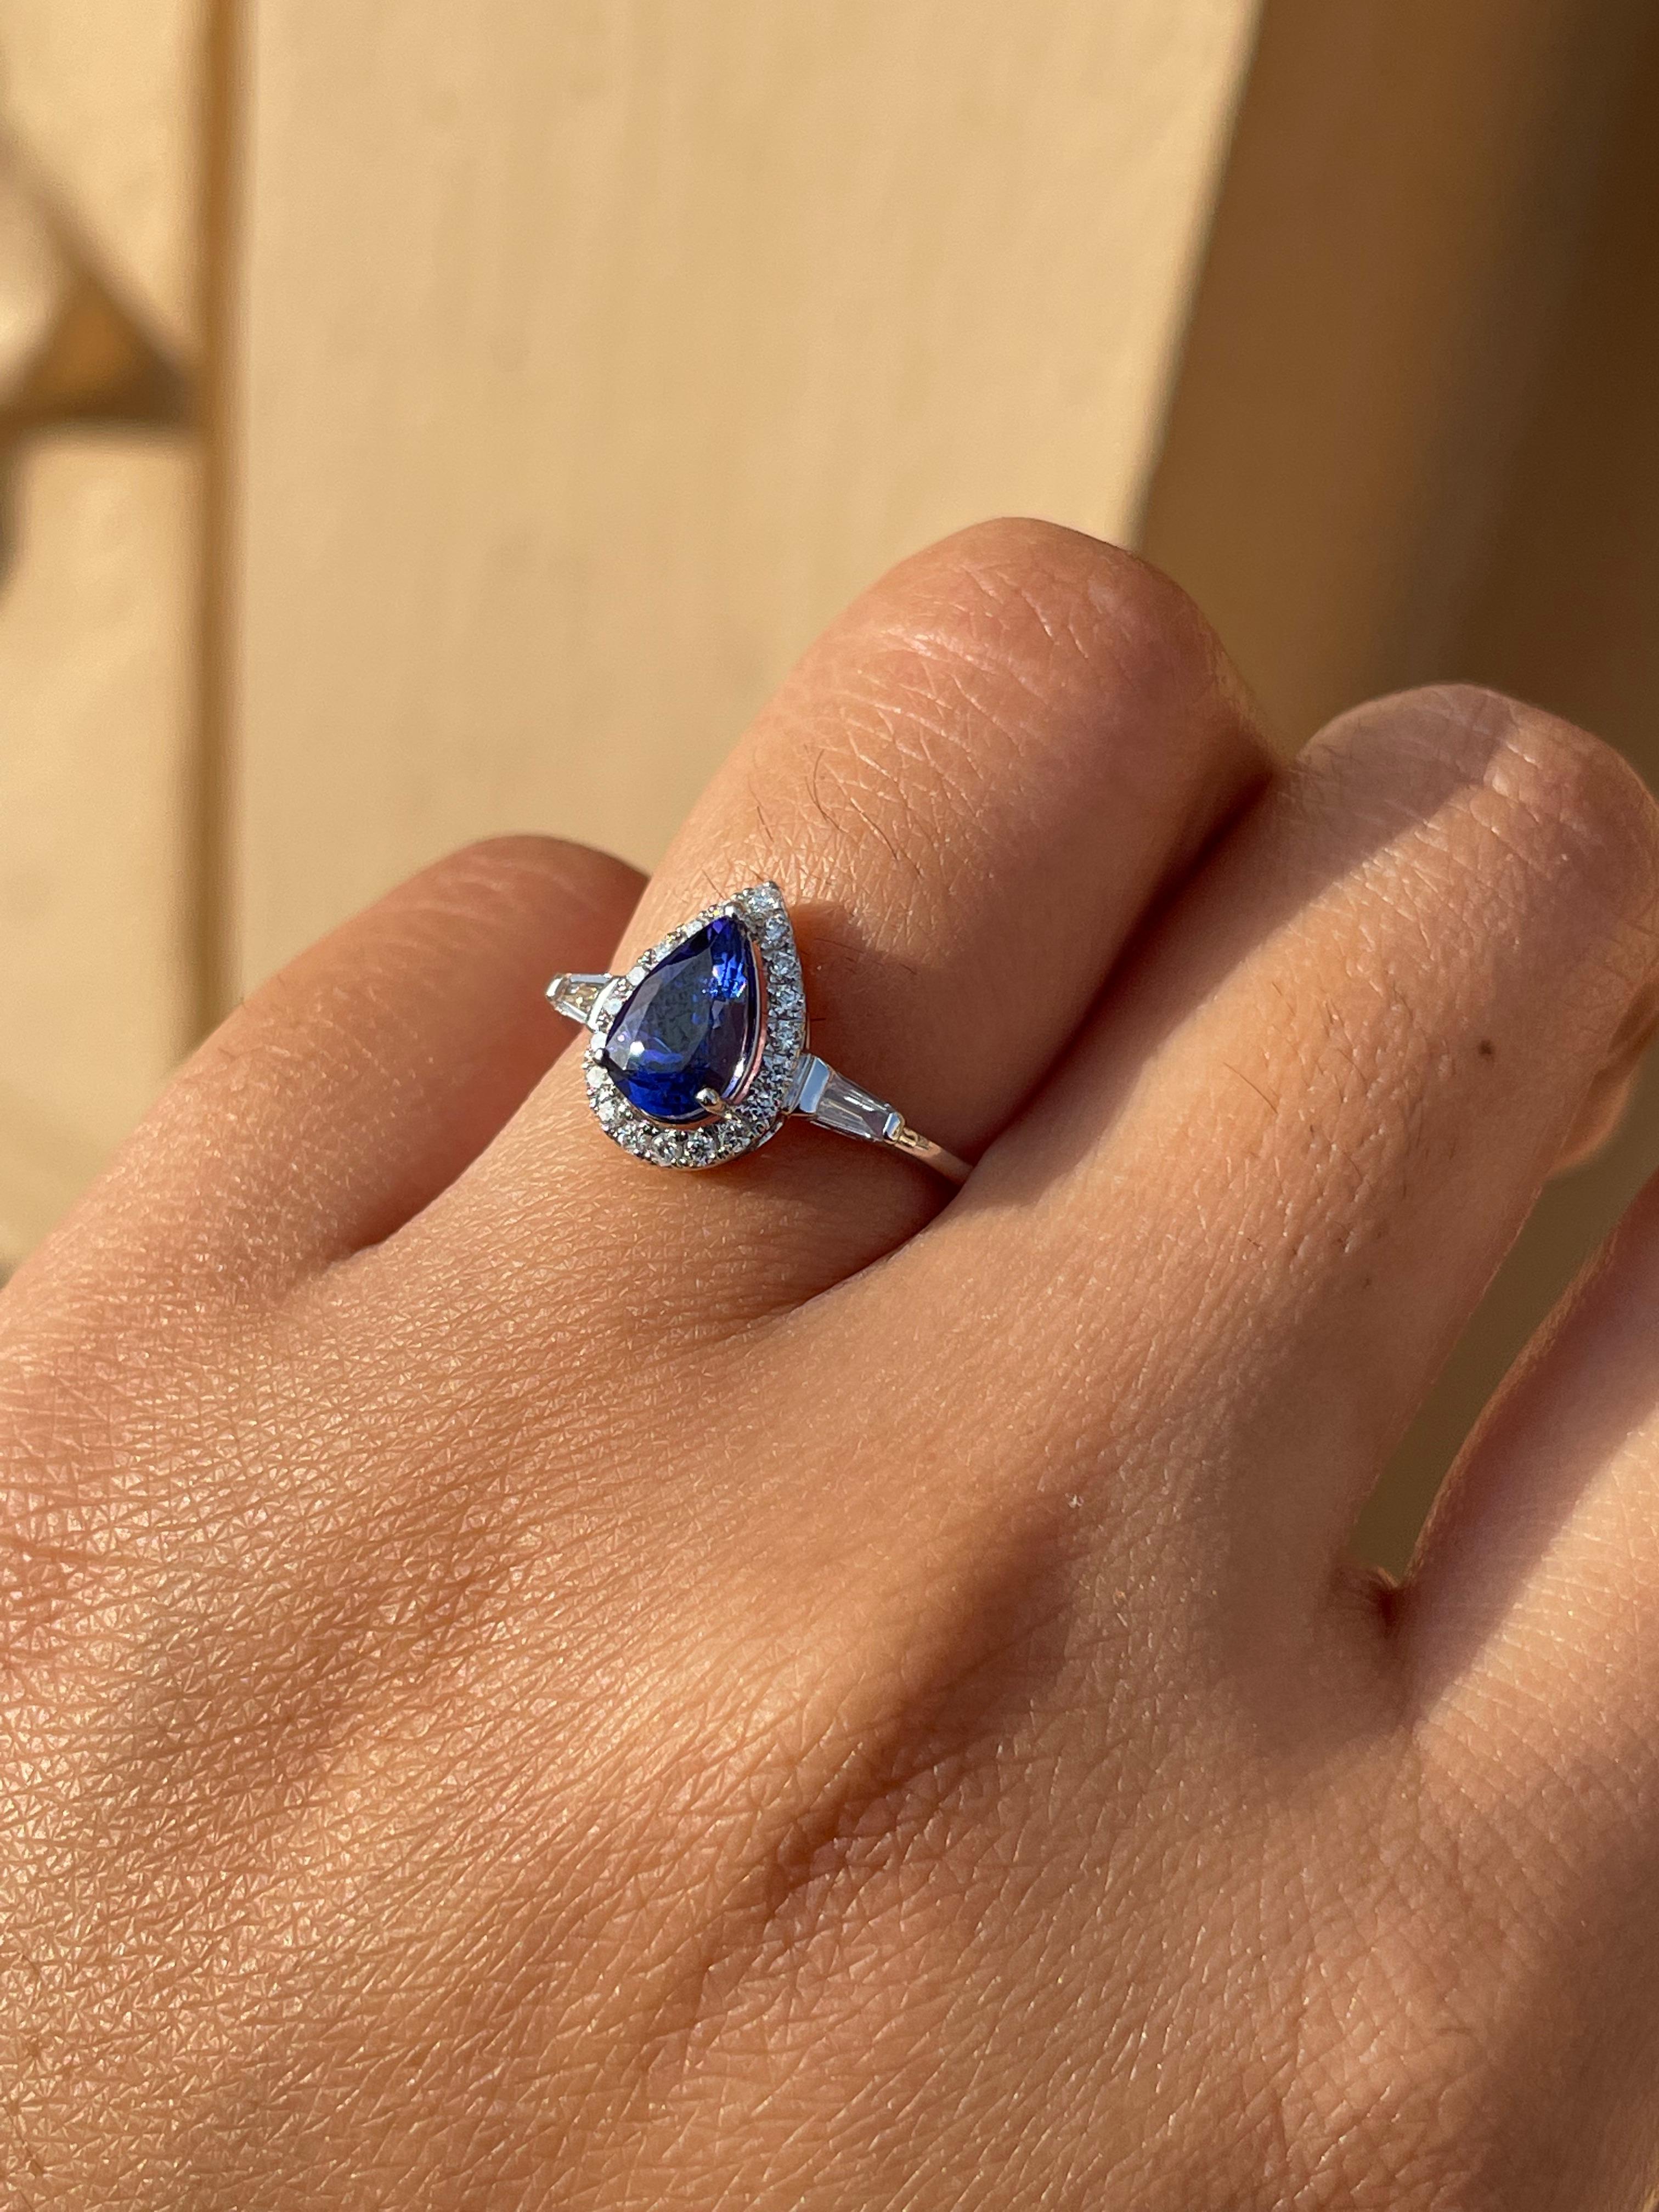 For Sale:  1.1 CTW Pear Shaped Tanzanite and Diamond Ring in 18k Solid White Gold 10